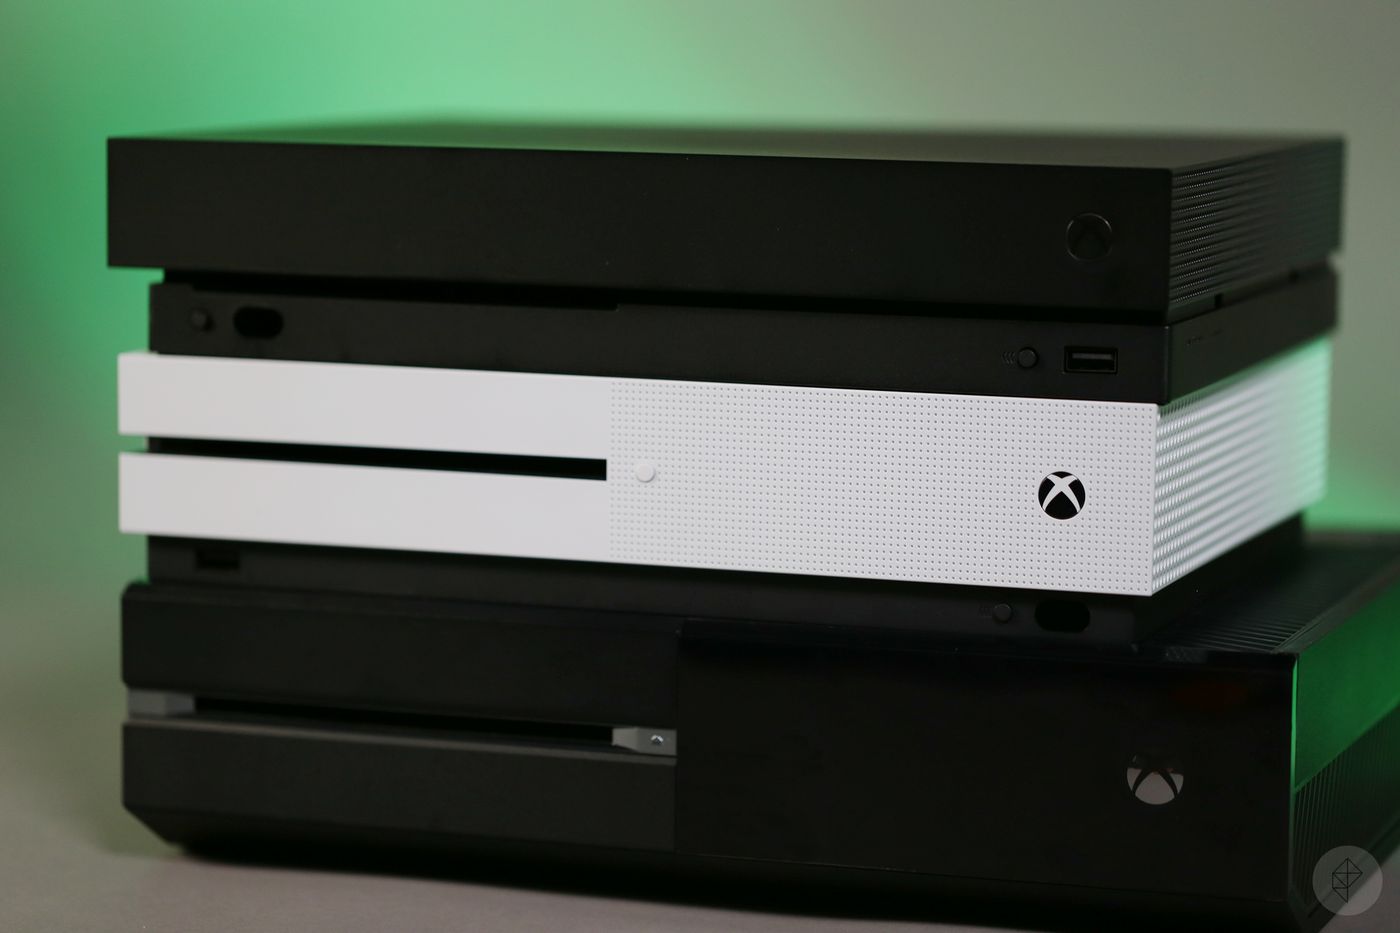 The Xbox One X unremarkable, except its size